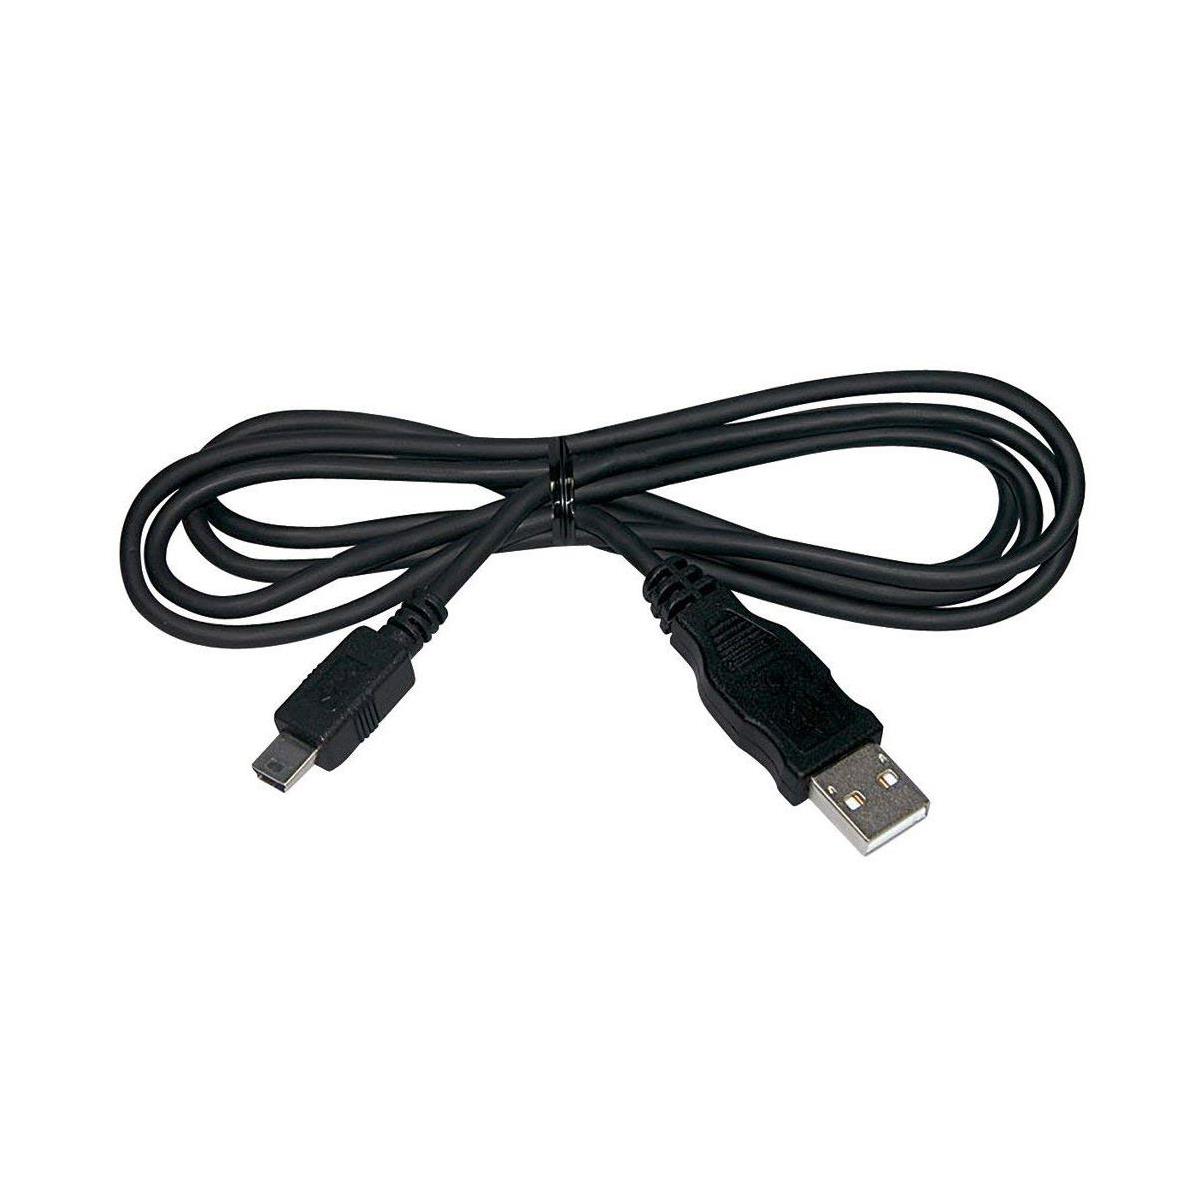 Image of MXL 6 foot USB Type A Male to Type B Mini Male Cable